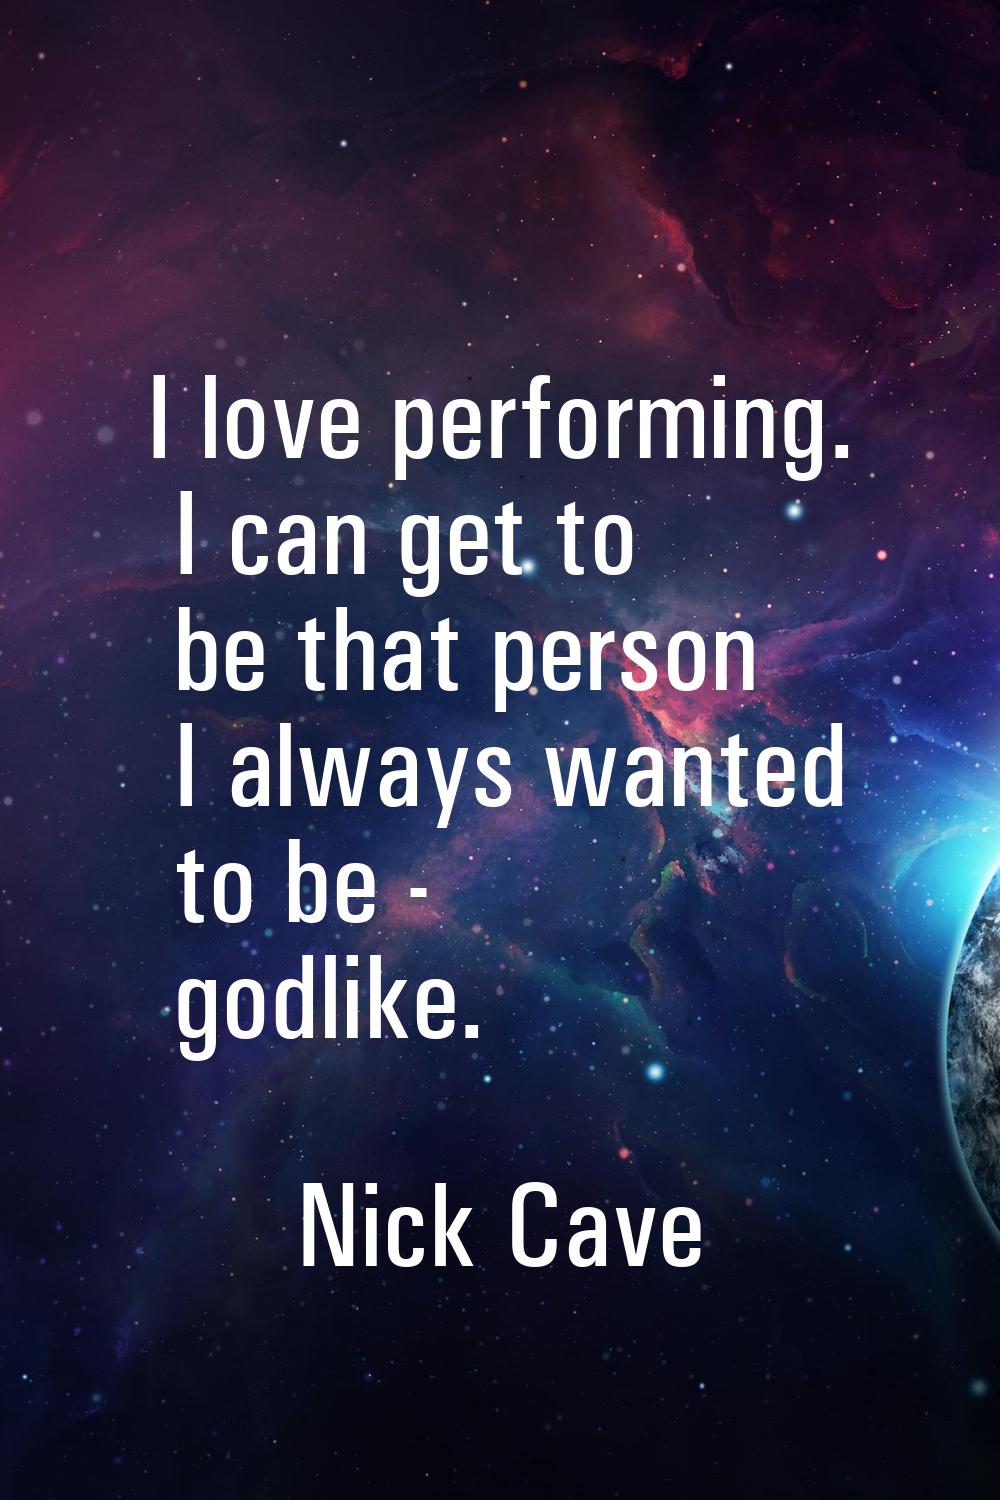 I love performing. I can get to be that person I always wanted to be - godlike.